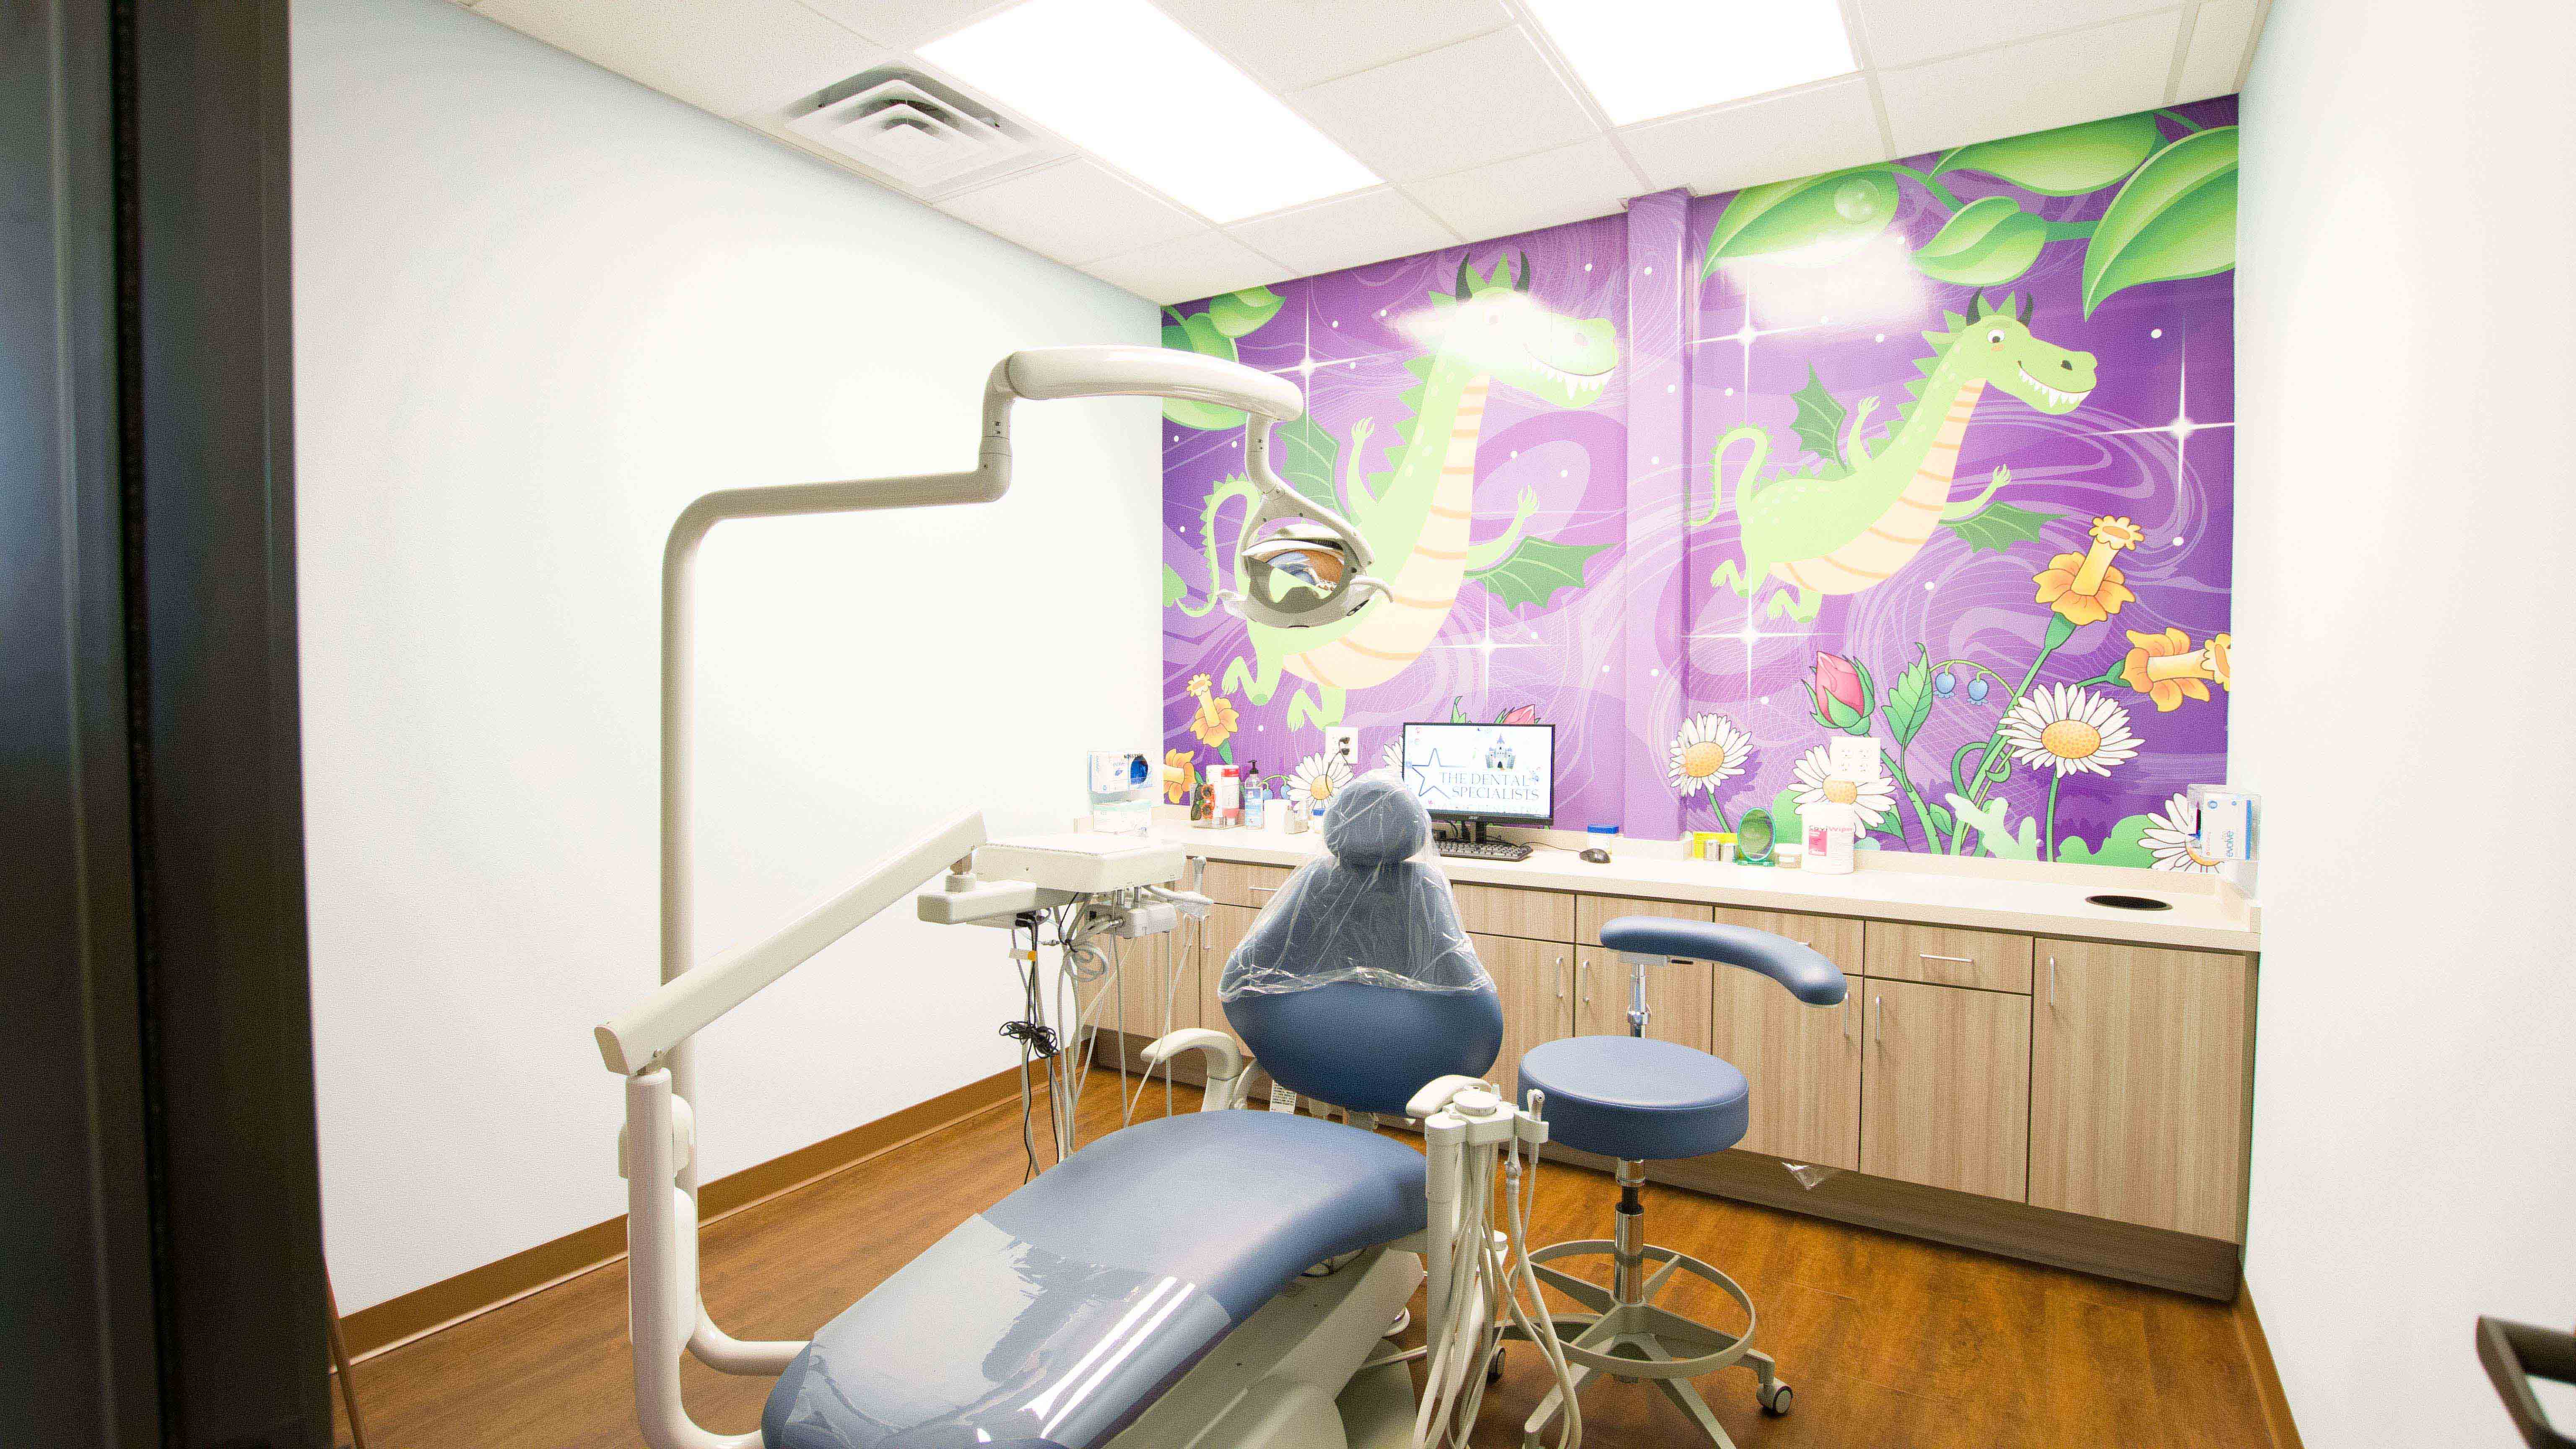 Dragons patined on dental treatment room walls